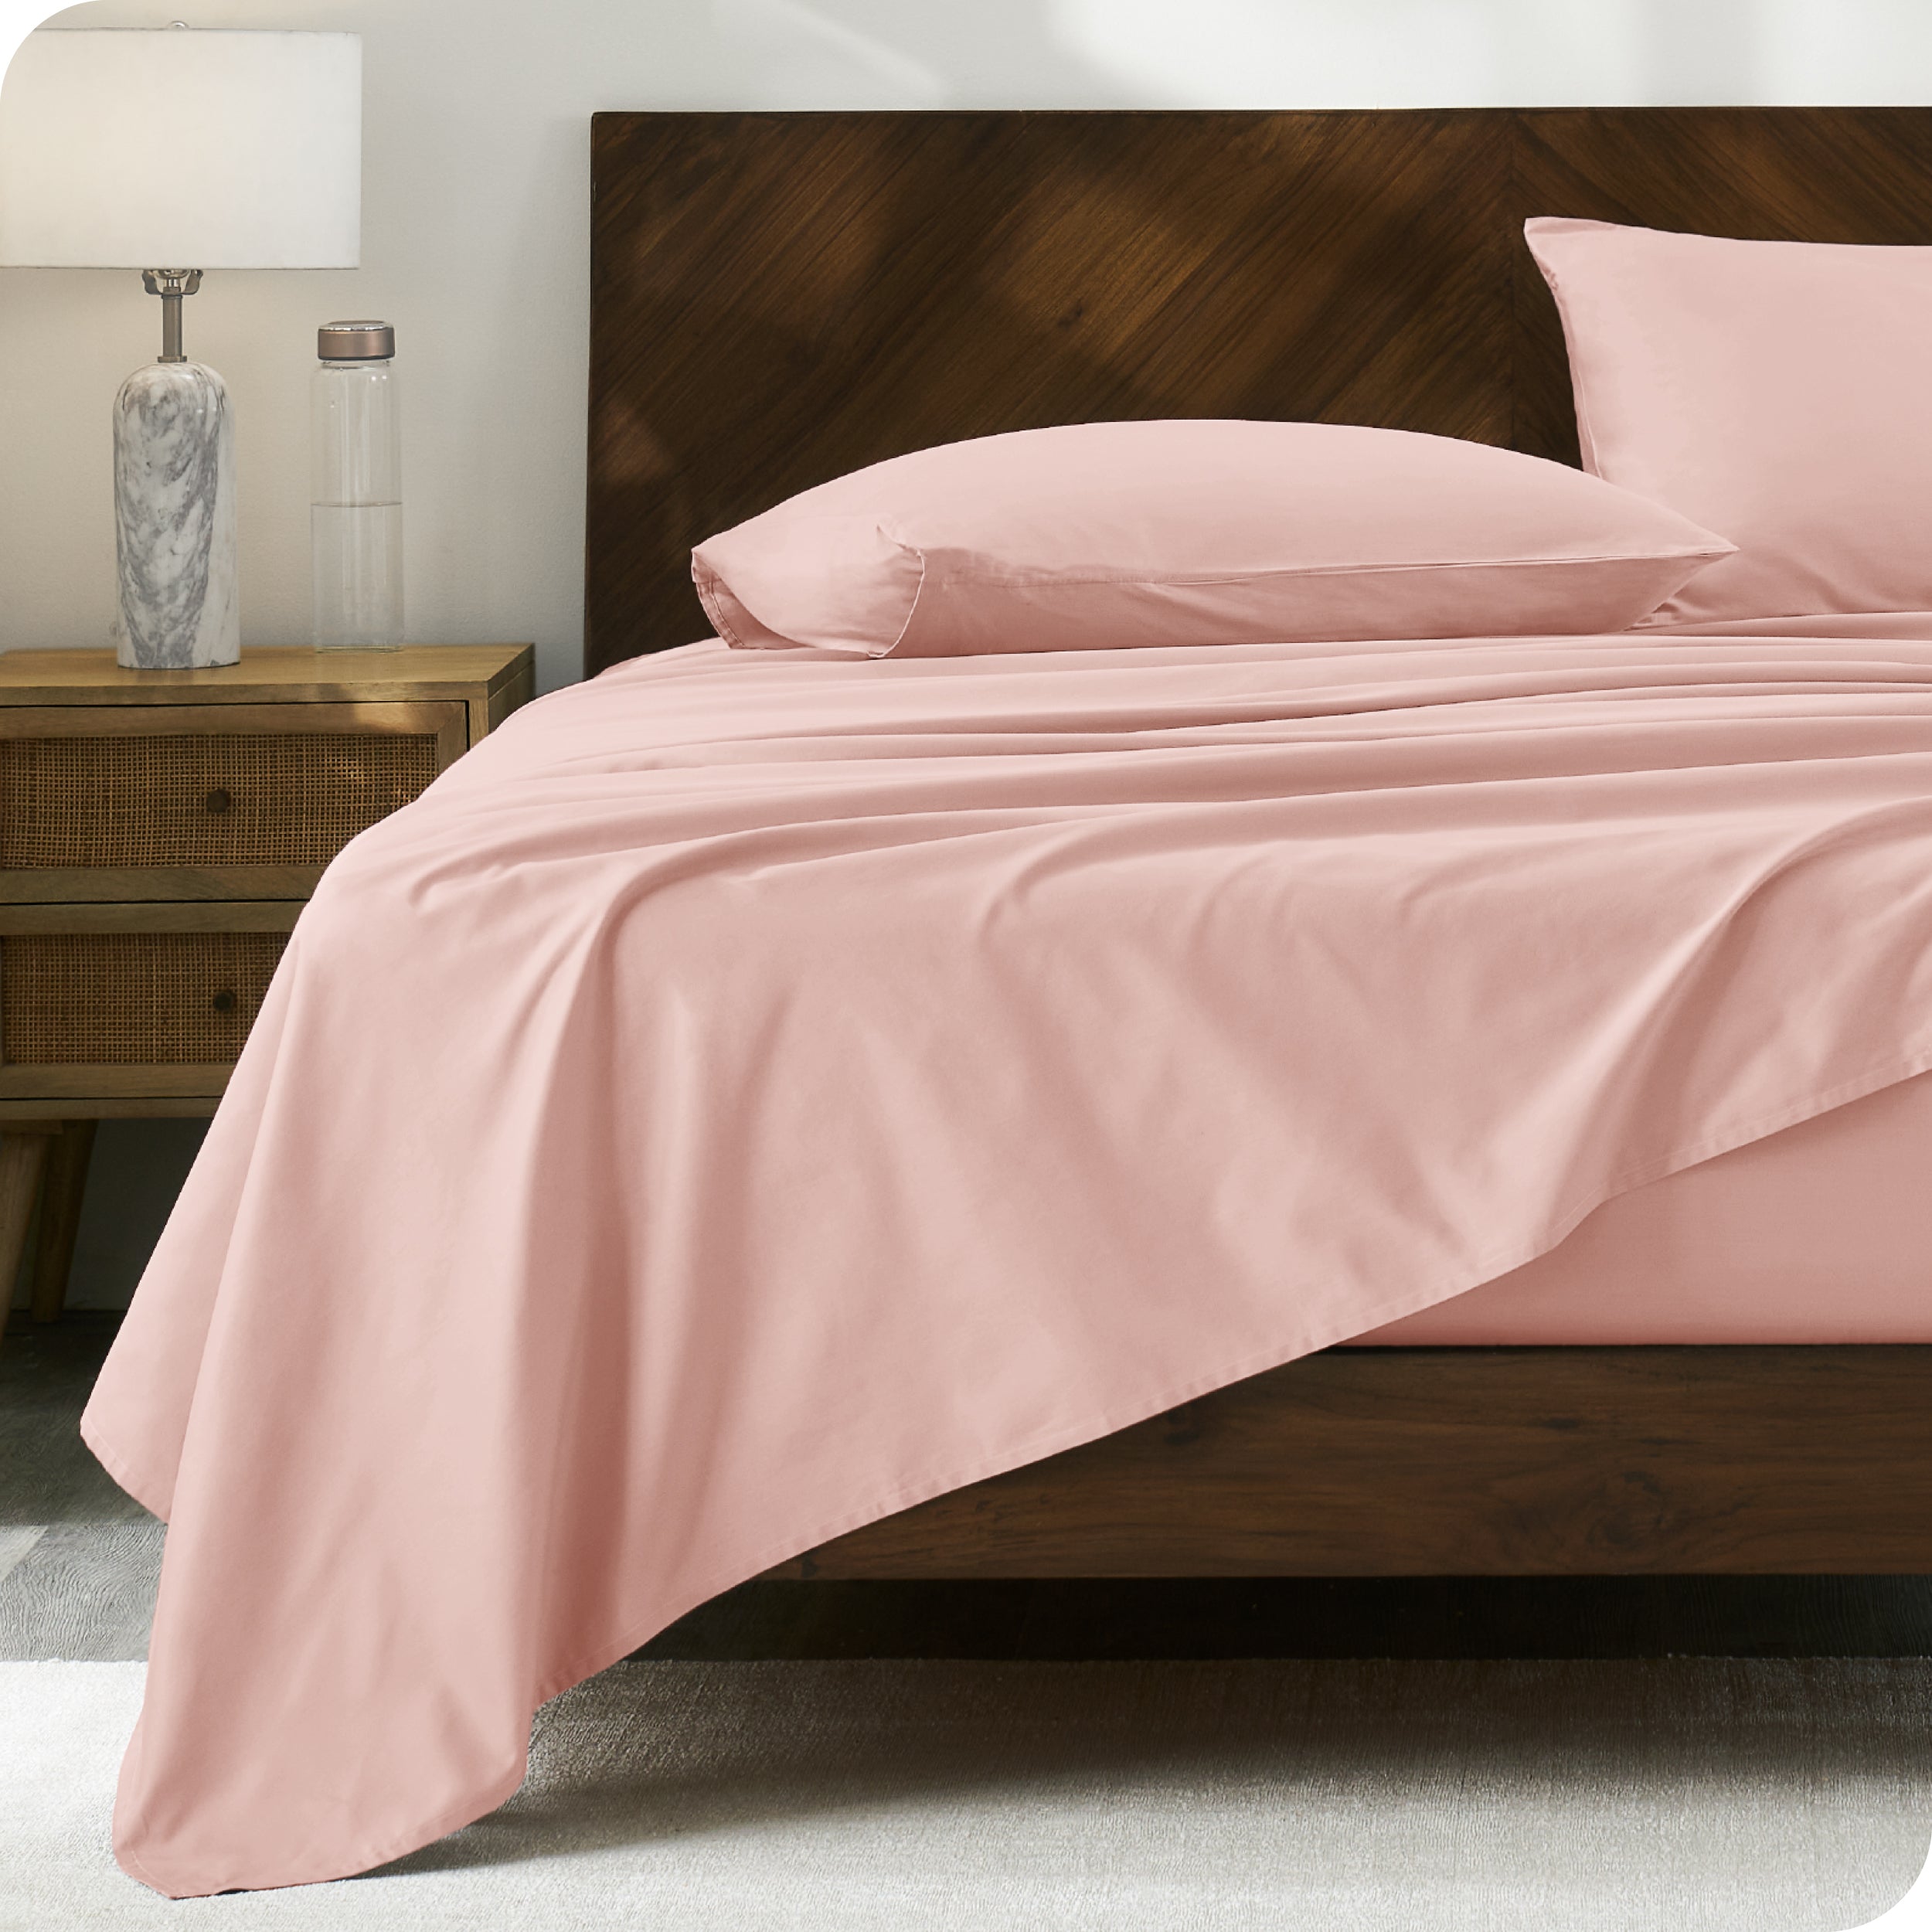 Modern wood bed with percale sheets and pillowcases